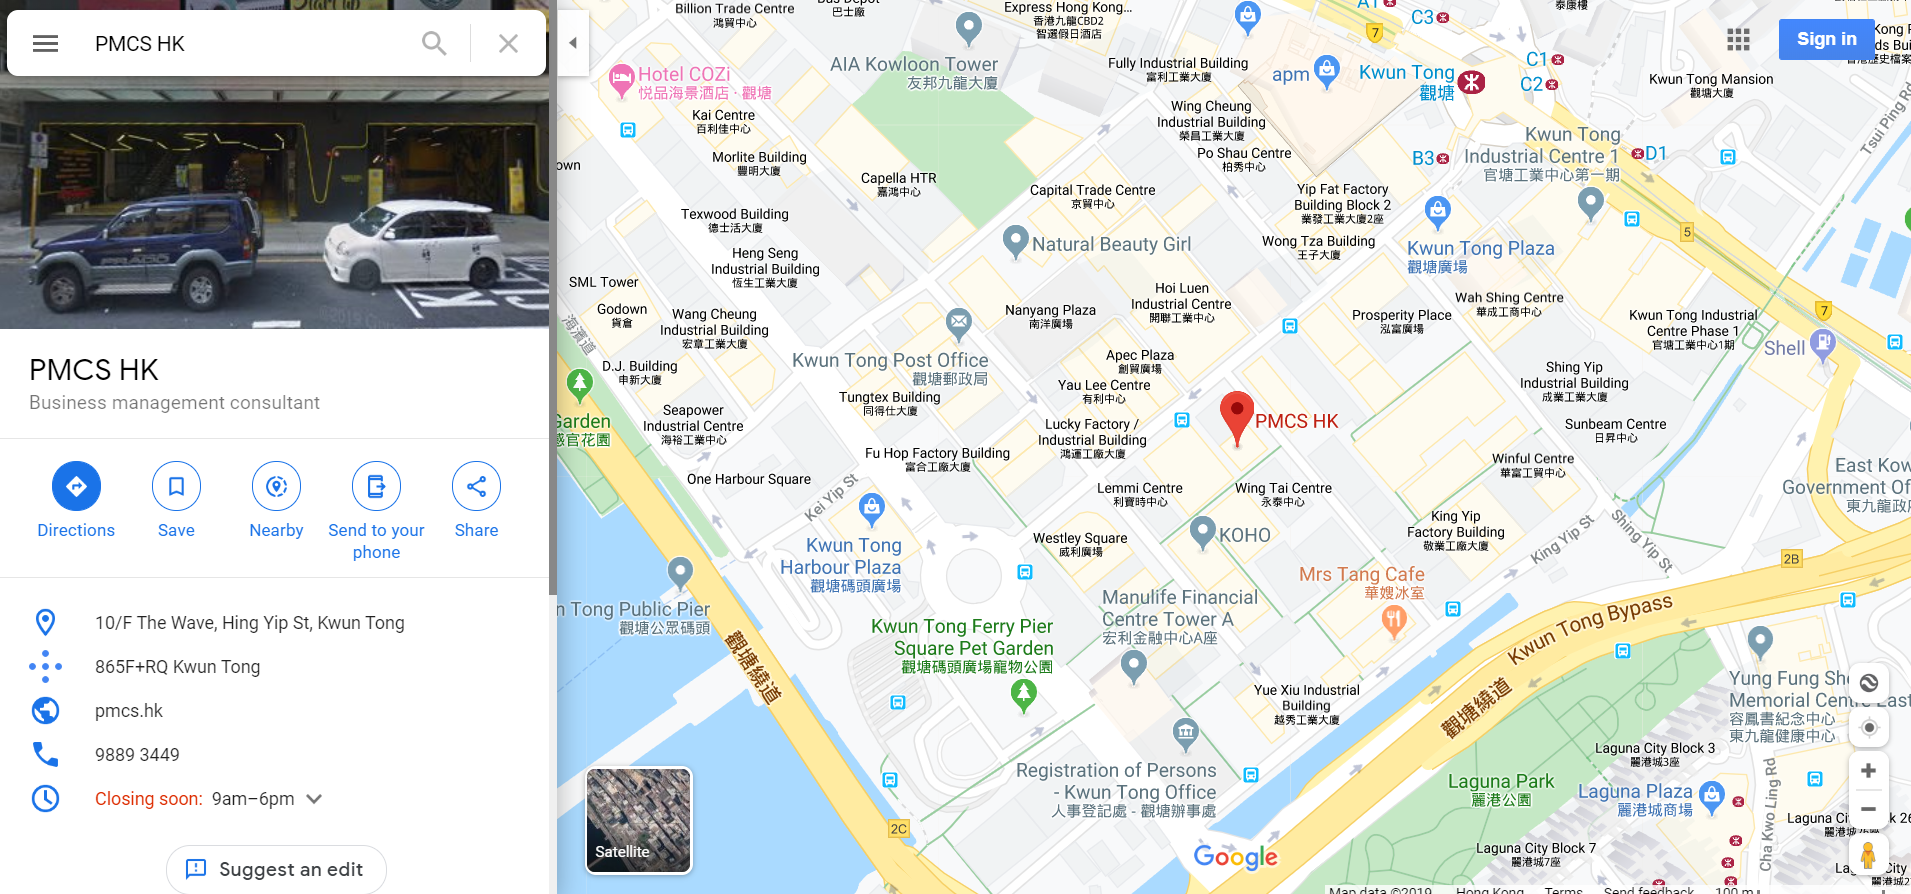 Search Company Name on Google Maps